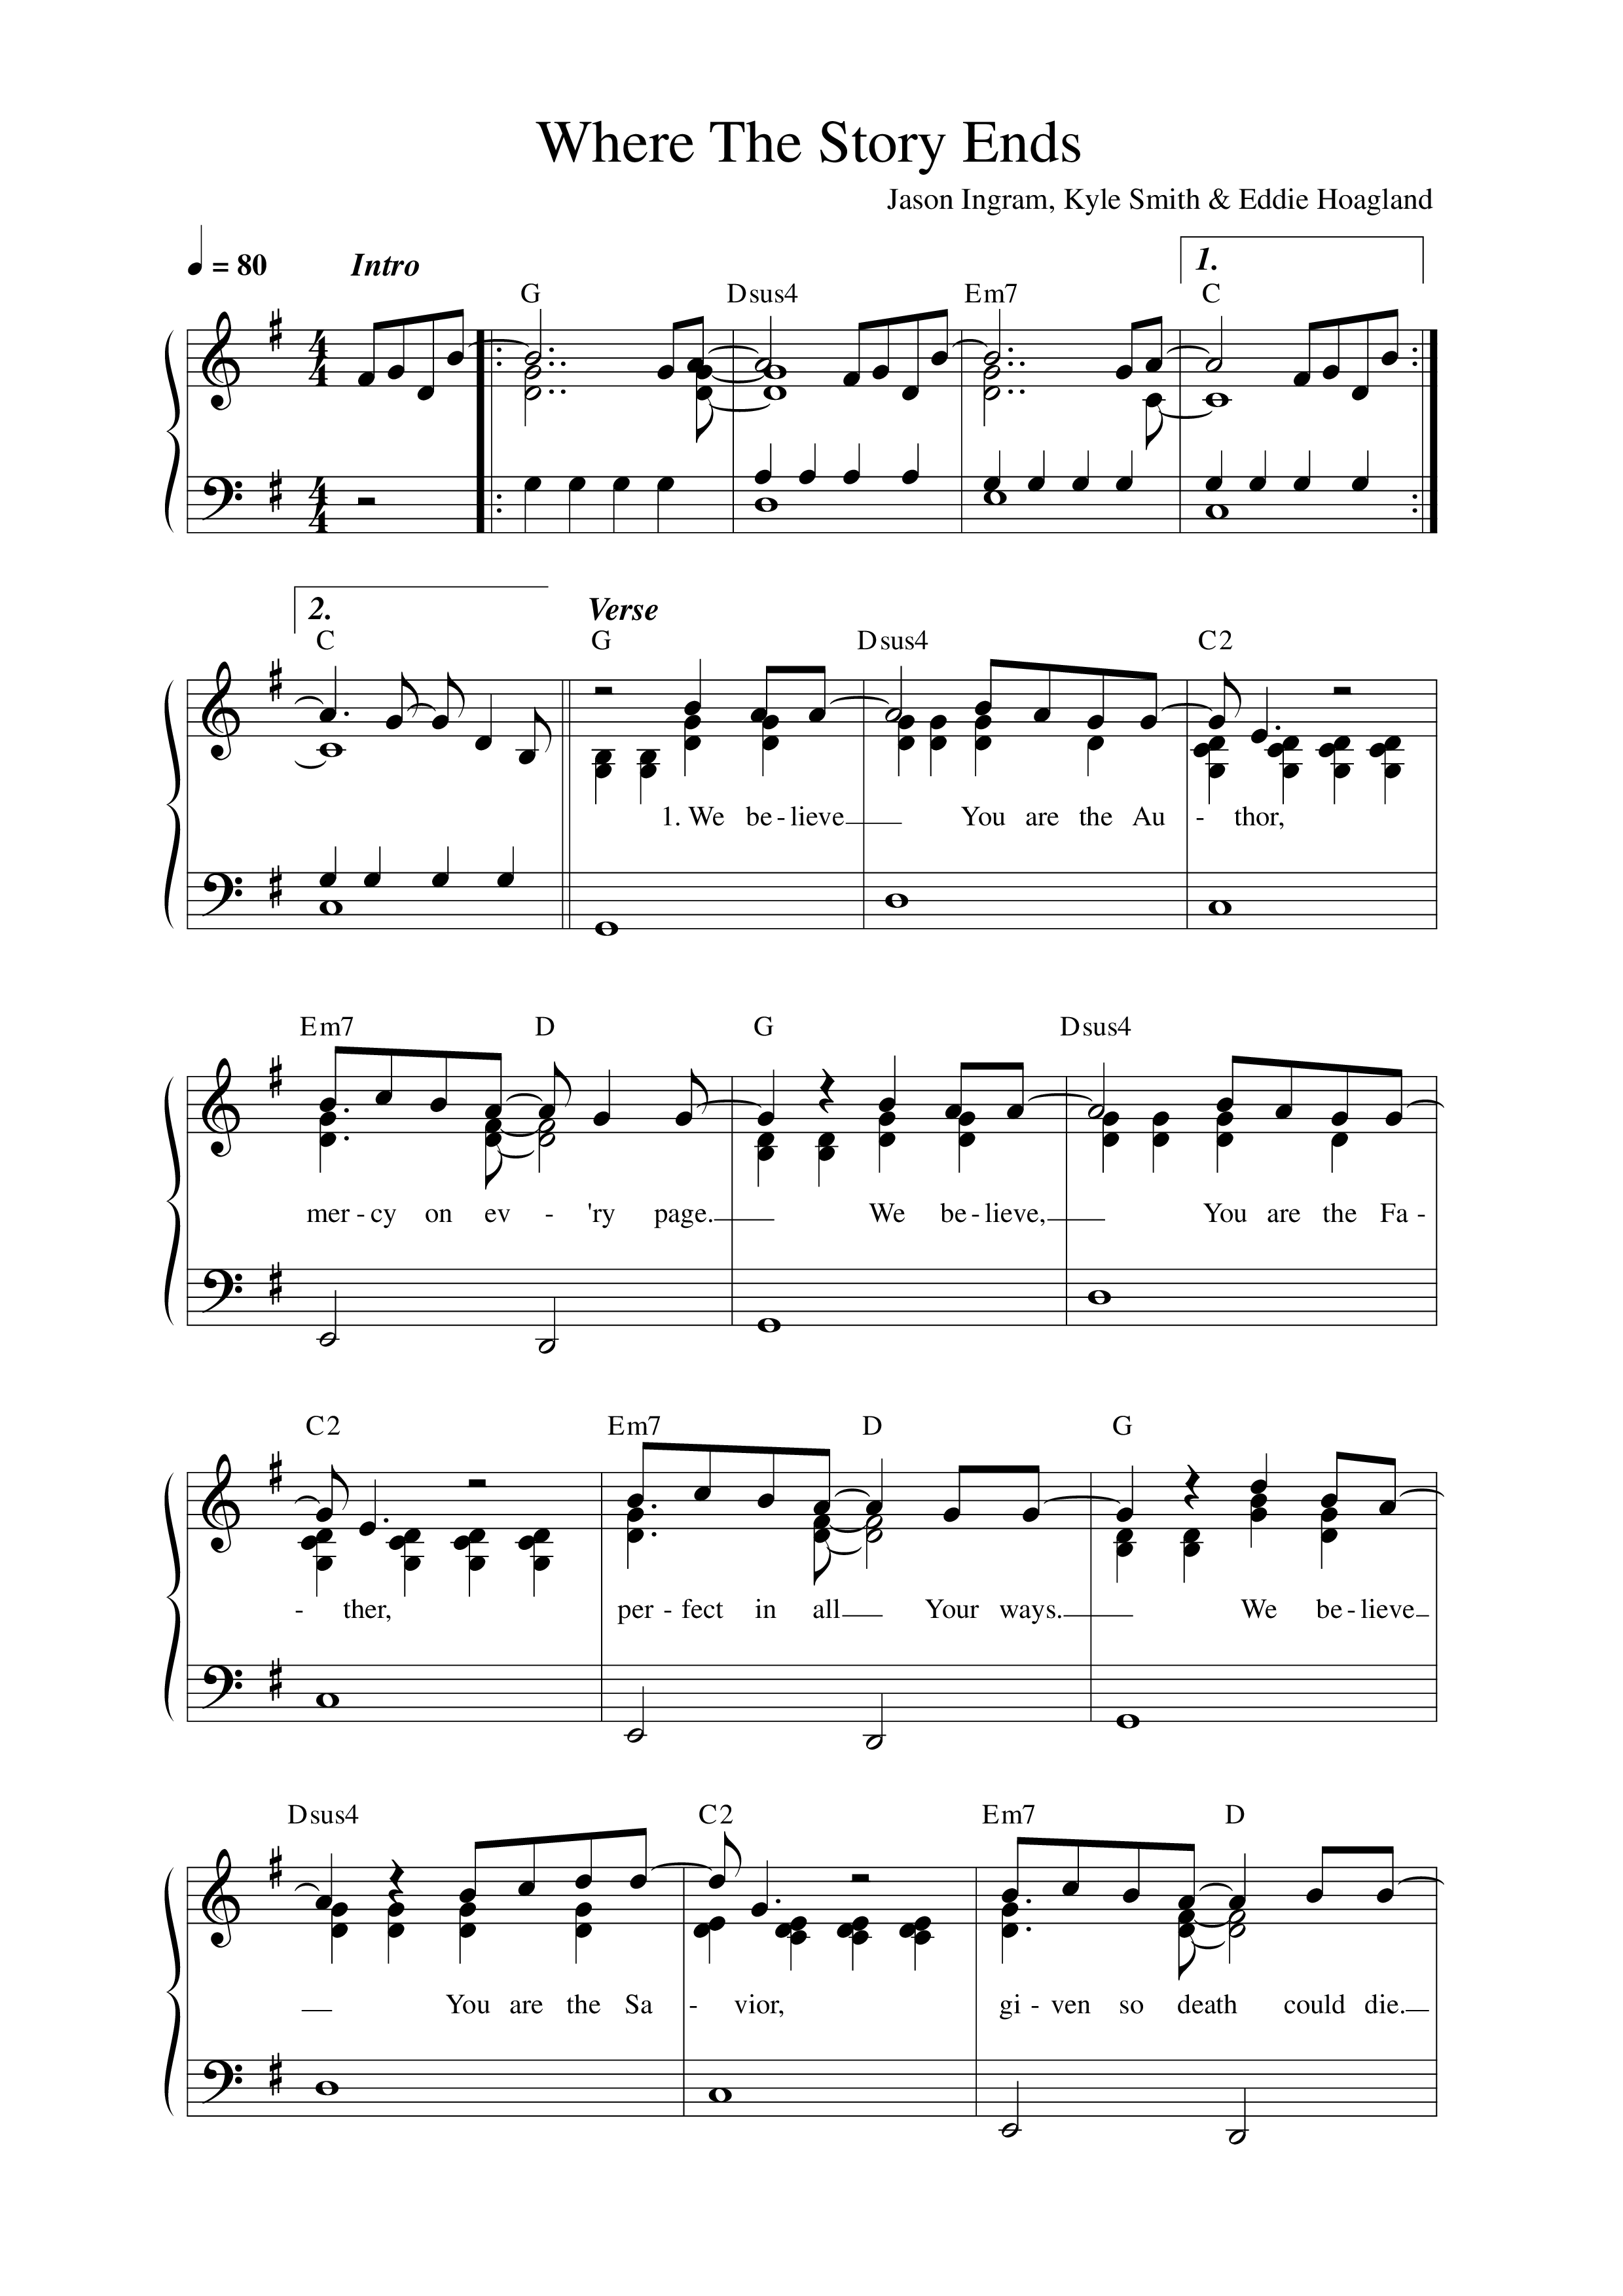 Where The Story Ends (Live) Lead Sheet Melody (New Life Worship / Kyle Smith)